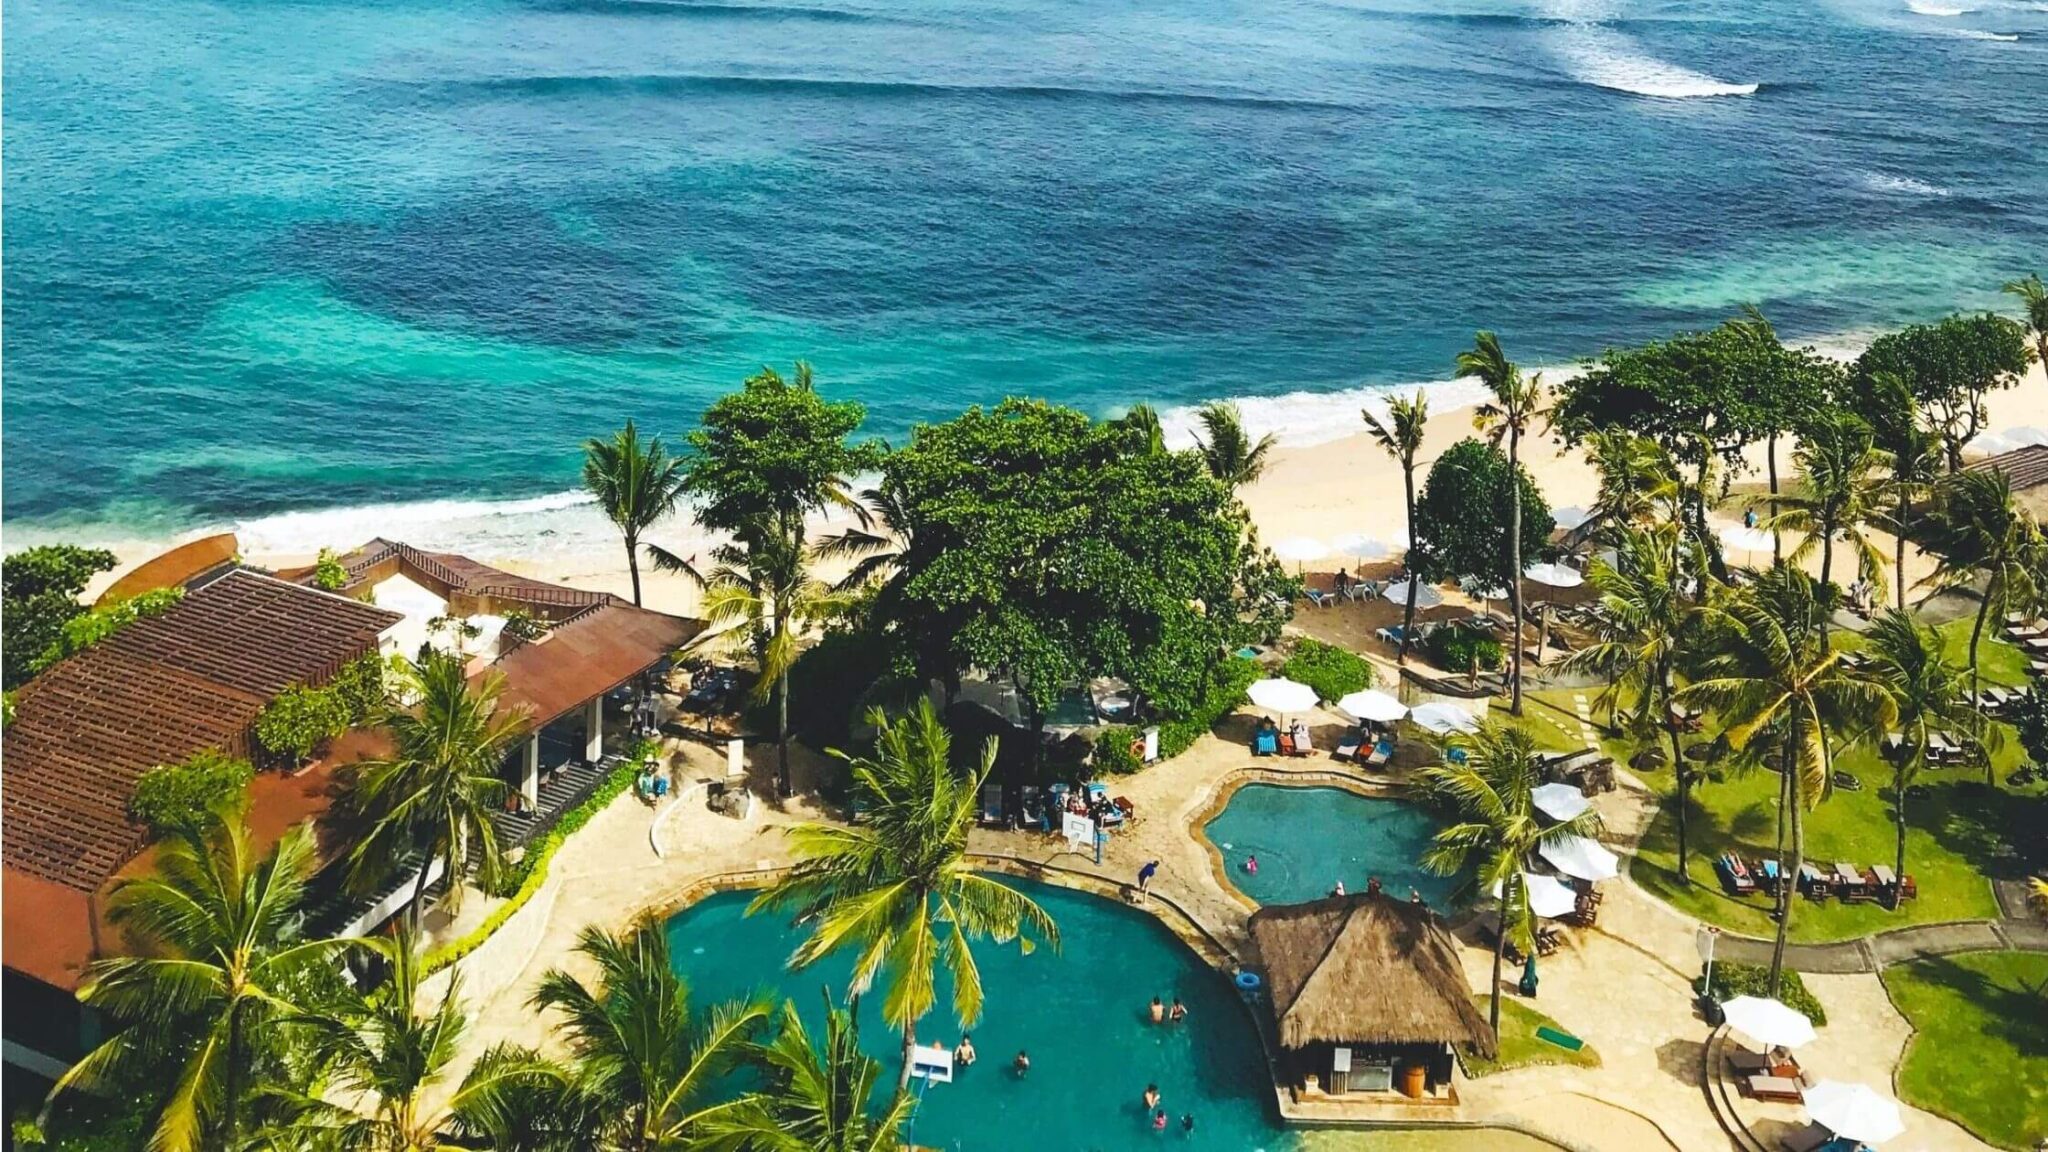 Bali Packages from India (All Inclusive Cost, Deals & Itinerary)